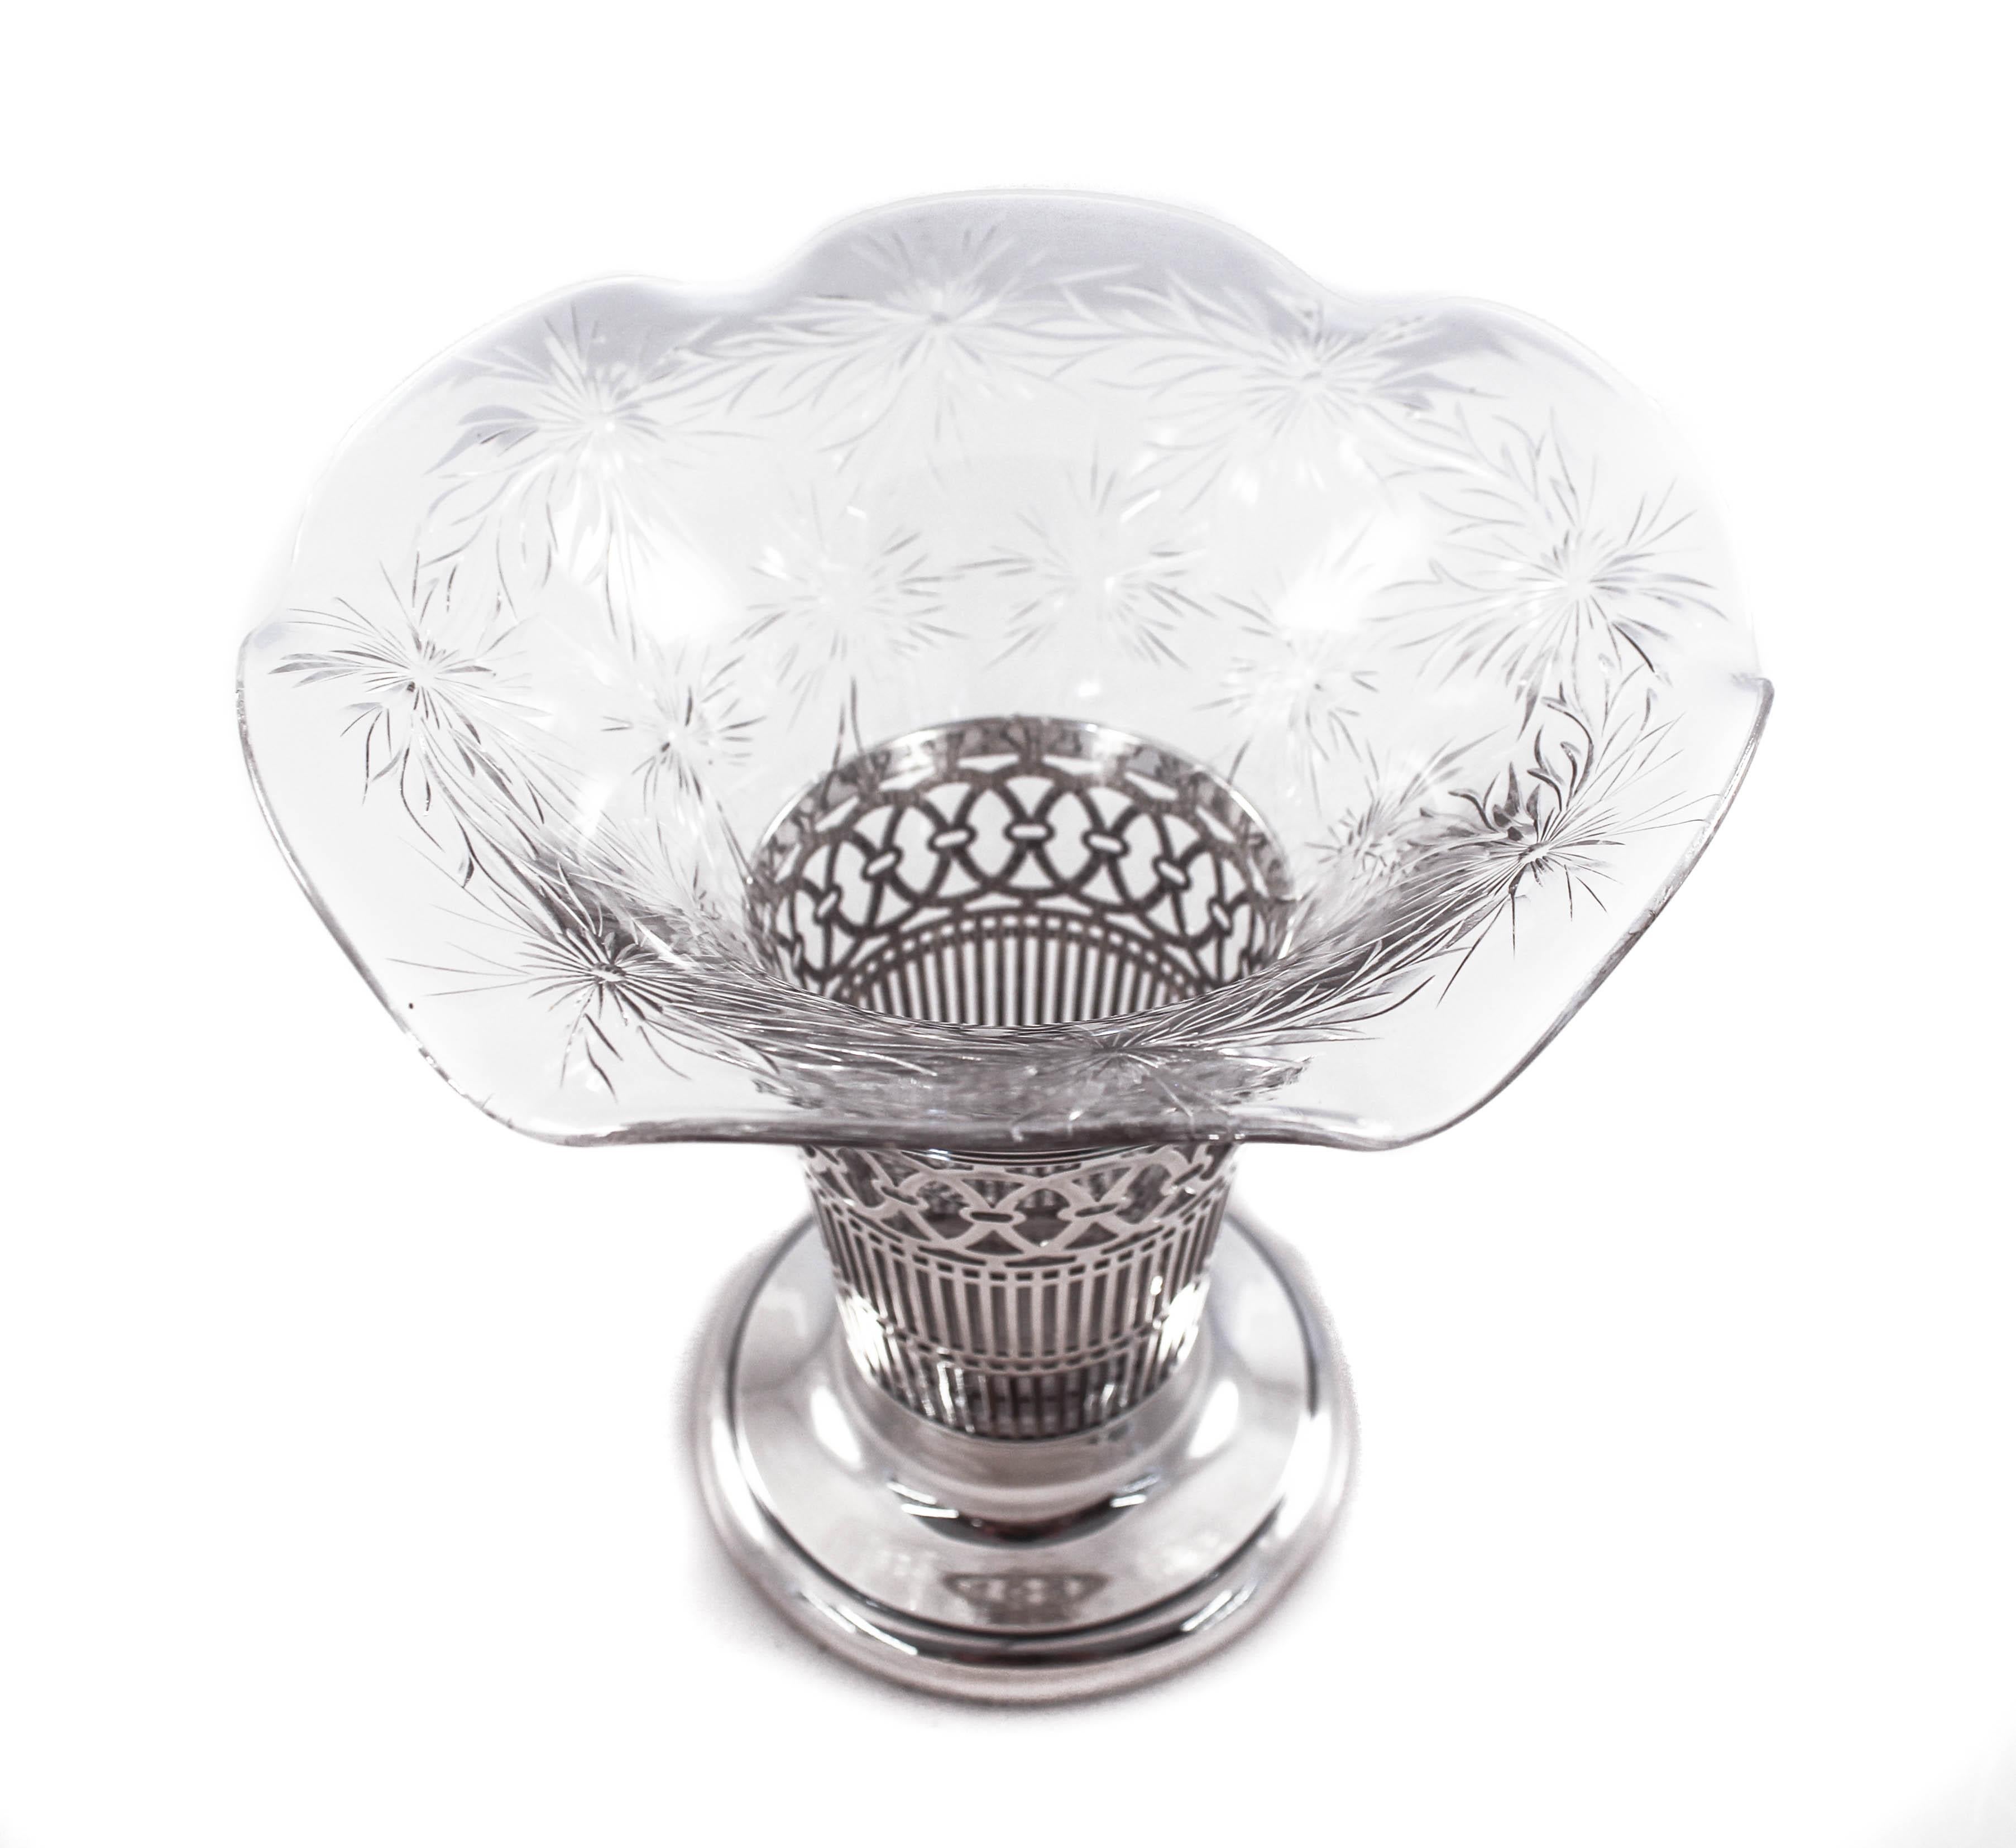 We are happy to offer this sterling and crystal vase by the Hawkes Glass Company. Based in Corning, NY, T.G. Hawkes & Co. (circa 1880-1959) was established by Thomas Gibbons Hawkes (1846-1913). Born in Ireland, Hawkes immigrated to Brooklyn in 1862,